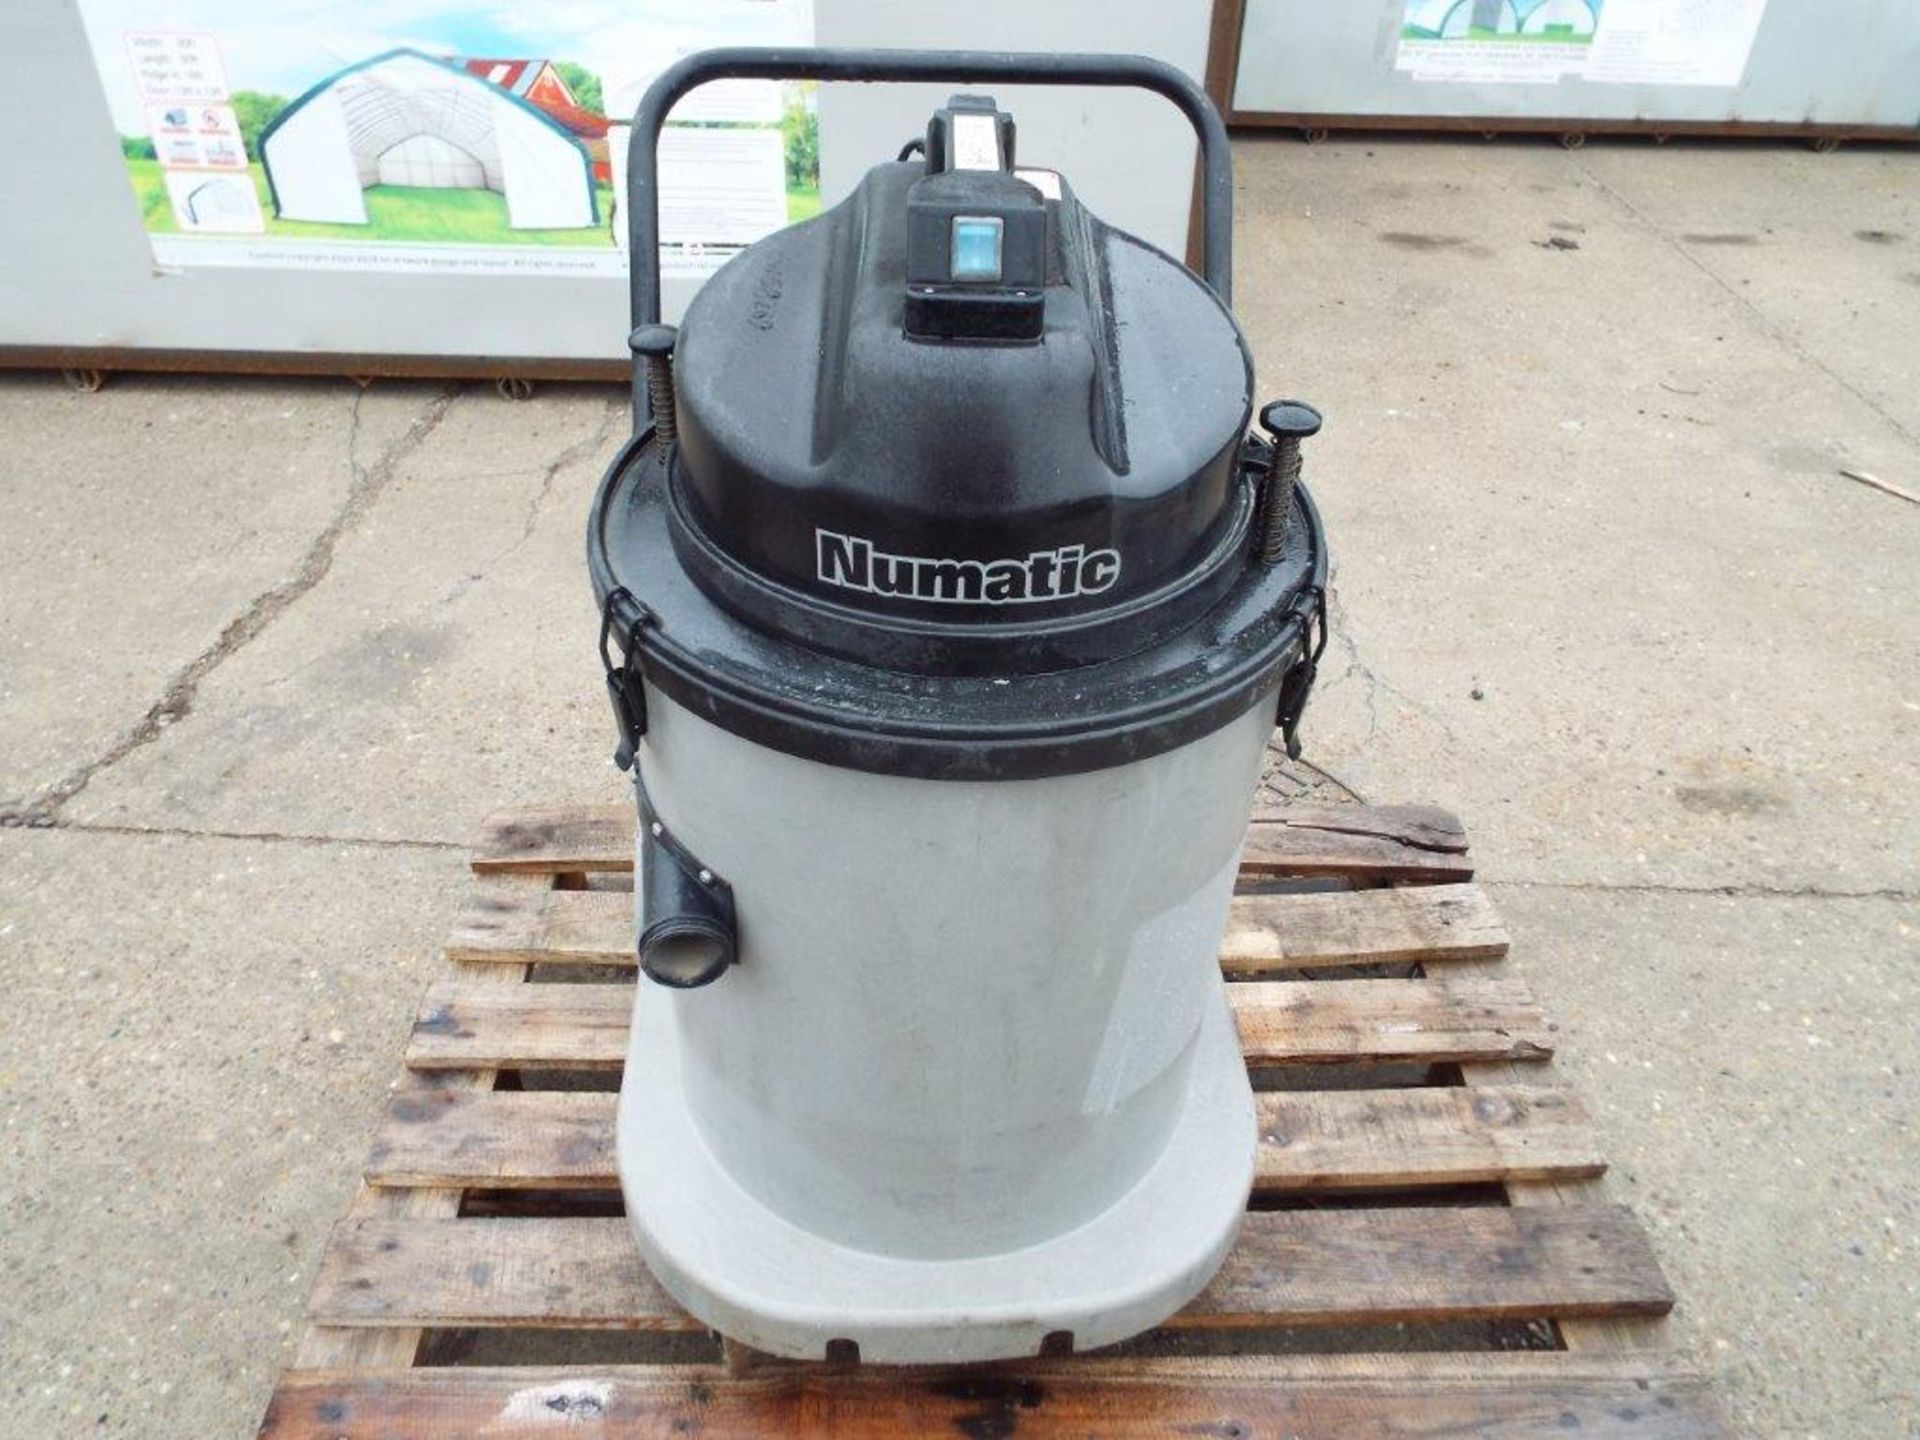 Numatic WVD 900-2 Industrial Vaccuum Cleaner - Image 2 of 5